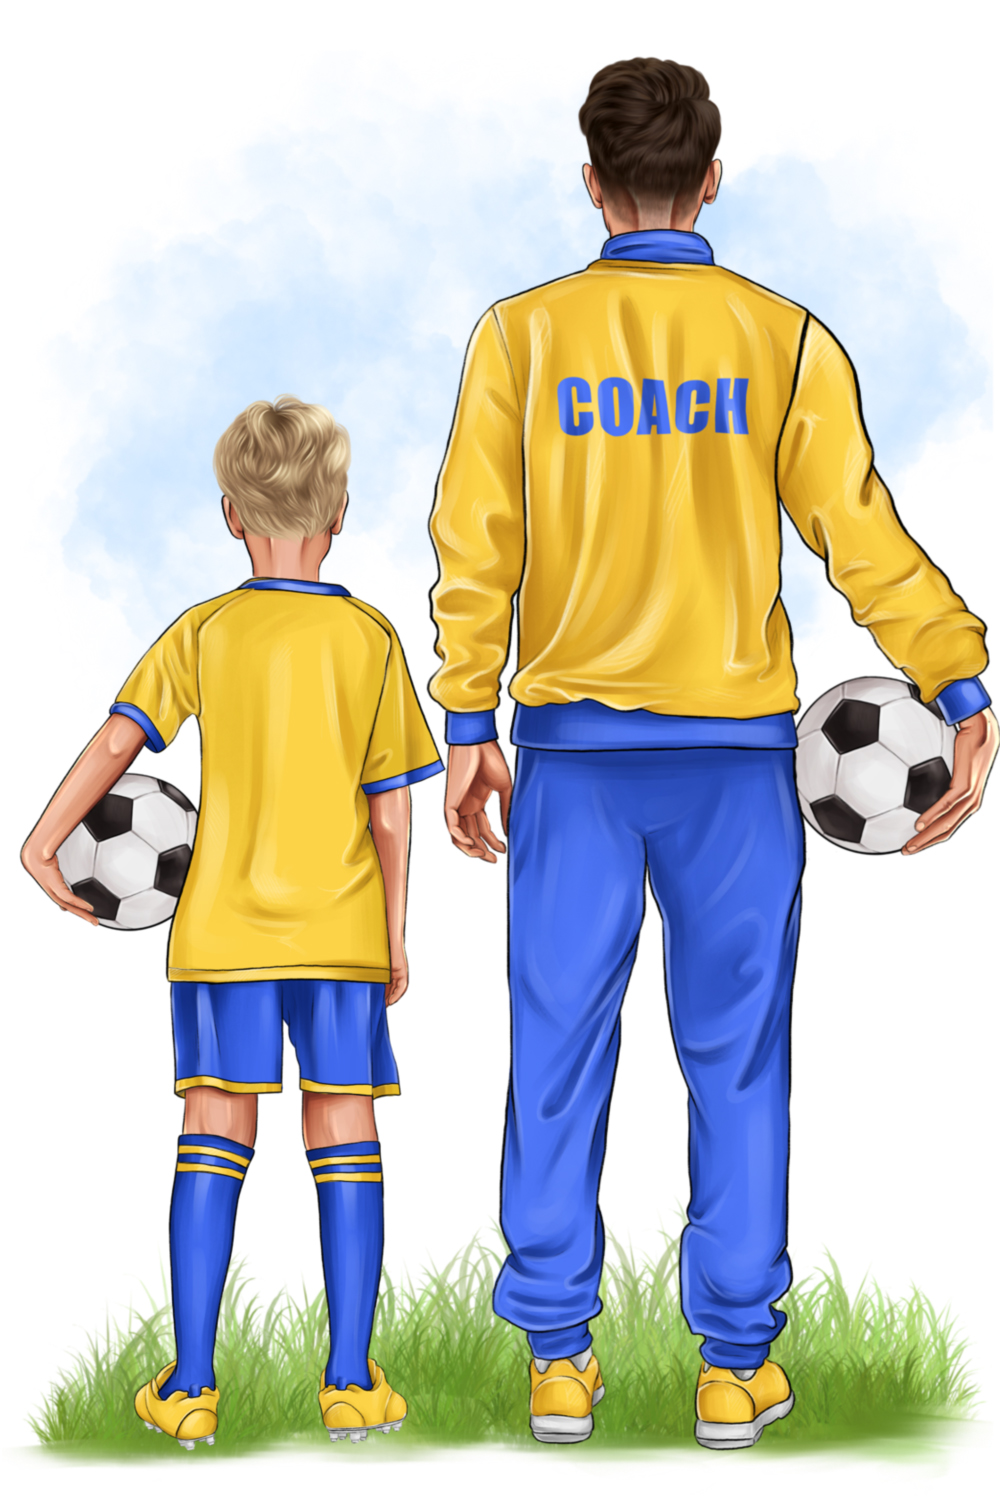 Football And Soccer Clipart Pinterest Image.